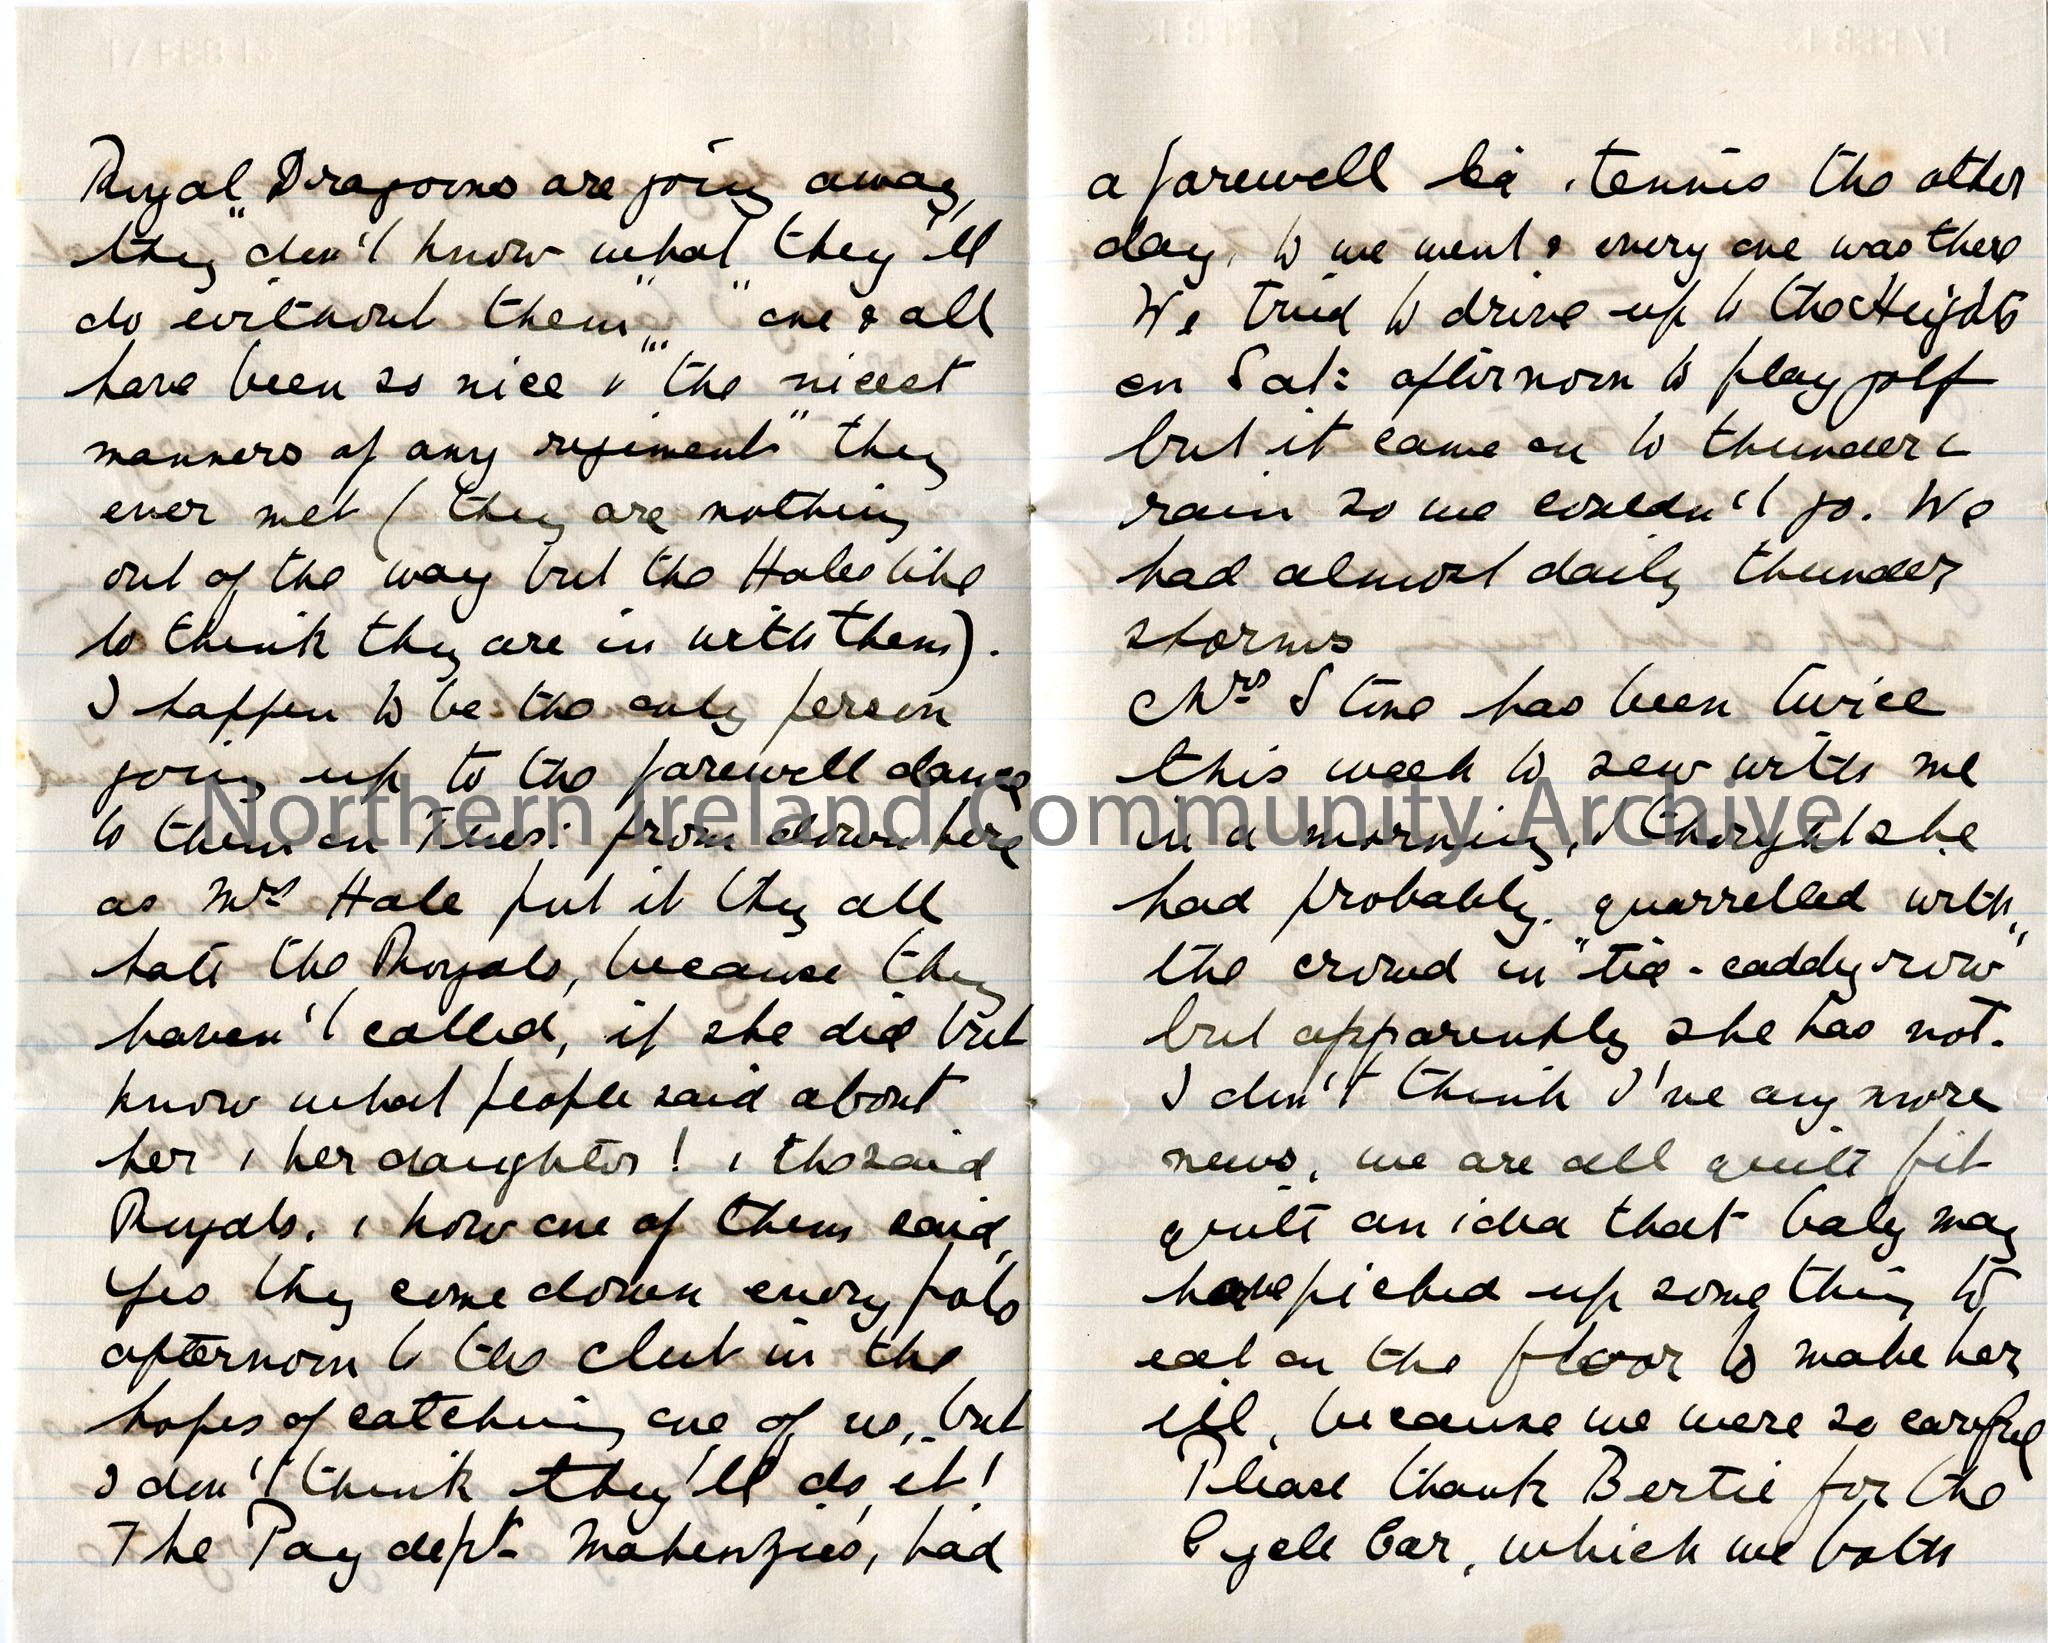 One of 2 double pages of handwritten letter from Dorothy to her mother. Discusses servant problems, dog found under bed eating frog, making lace edged… – img041b